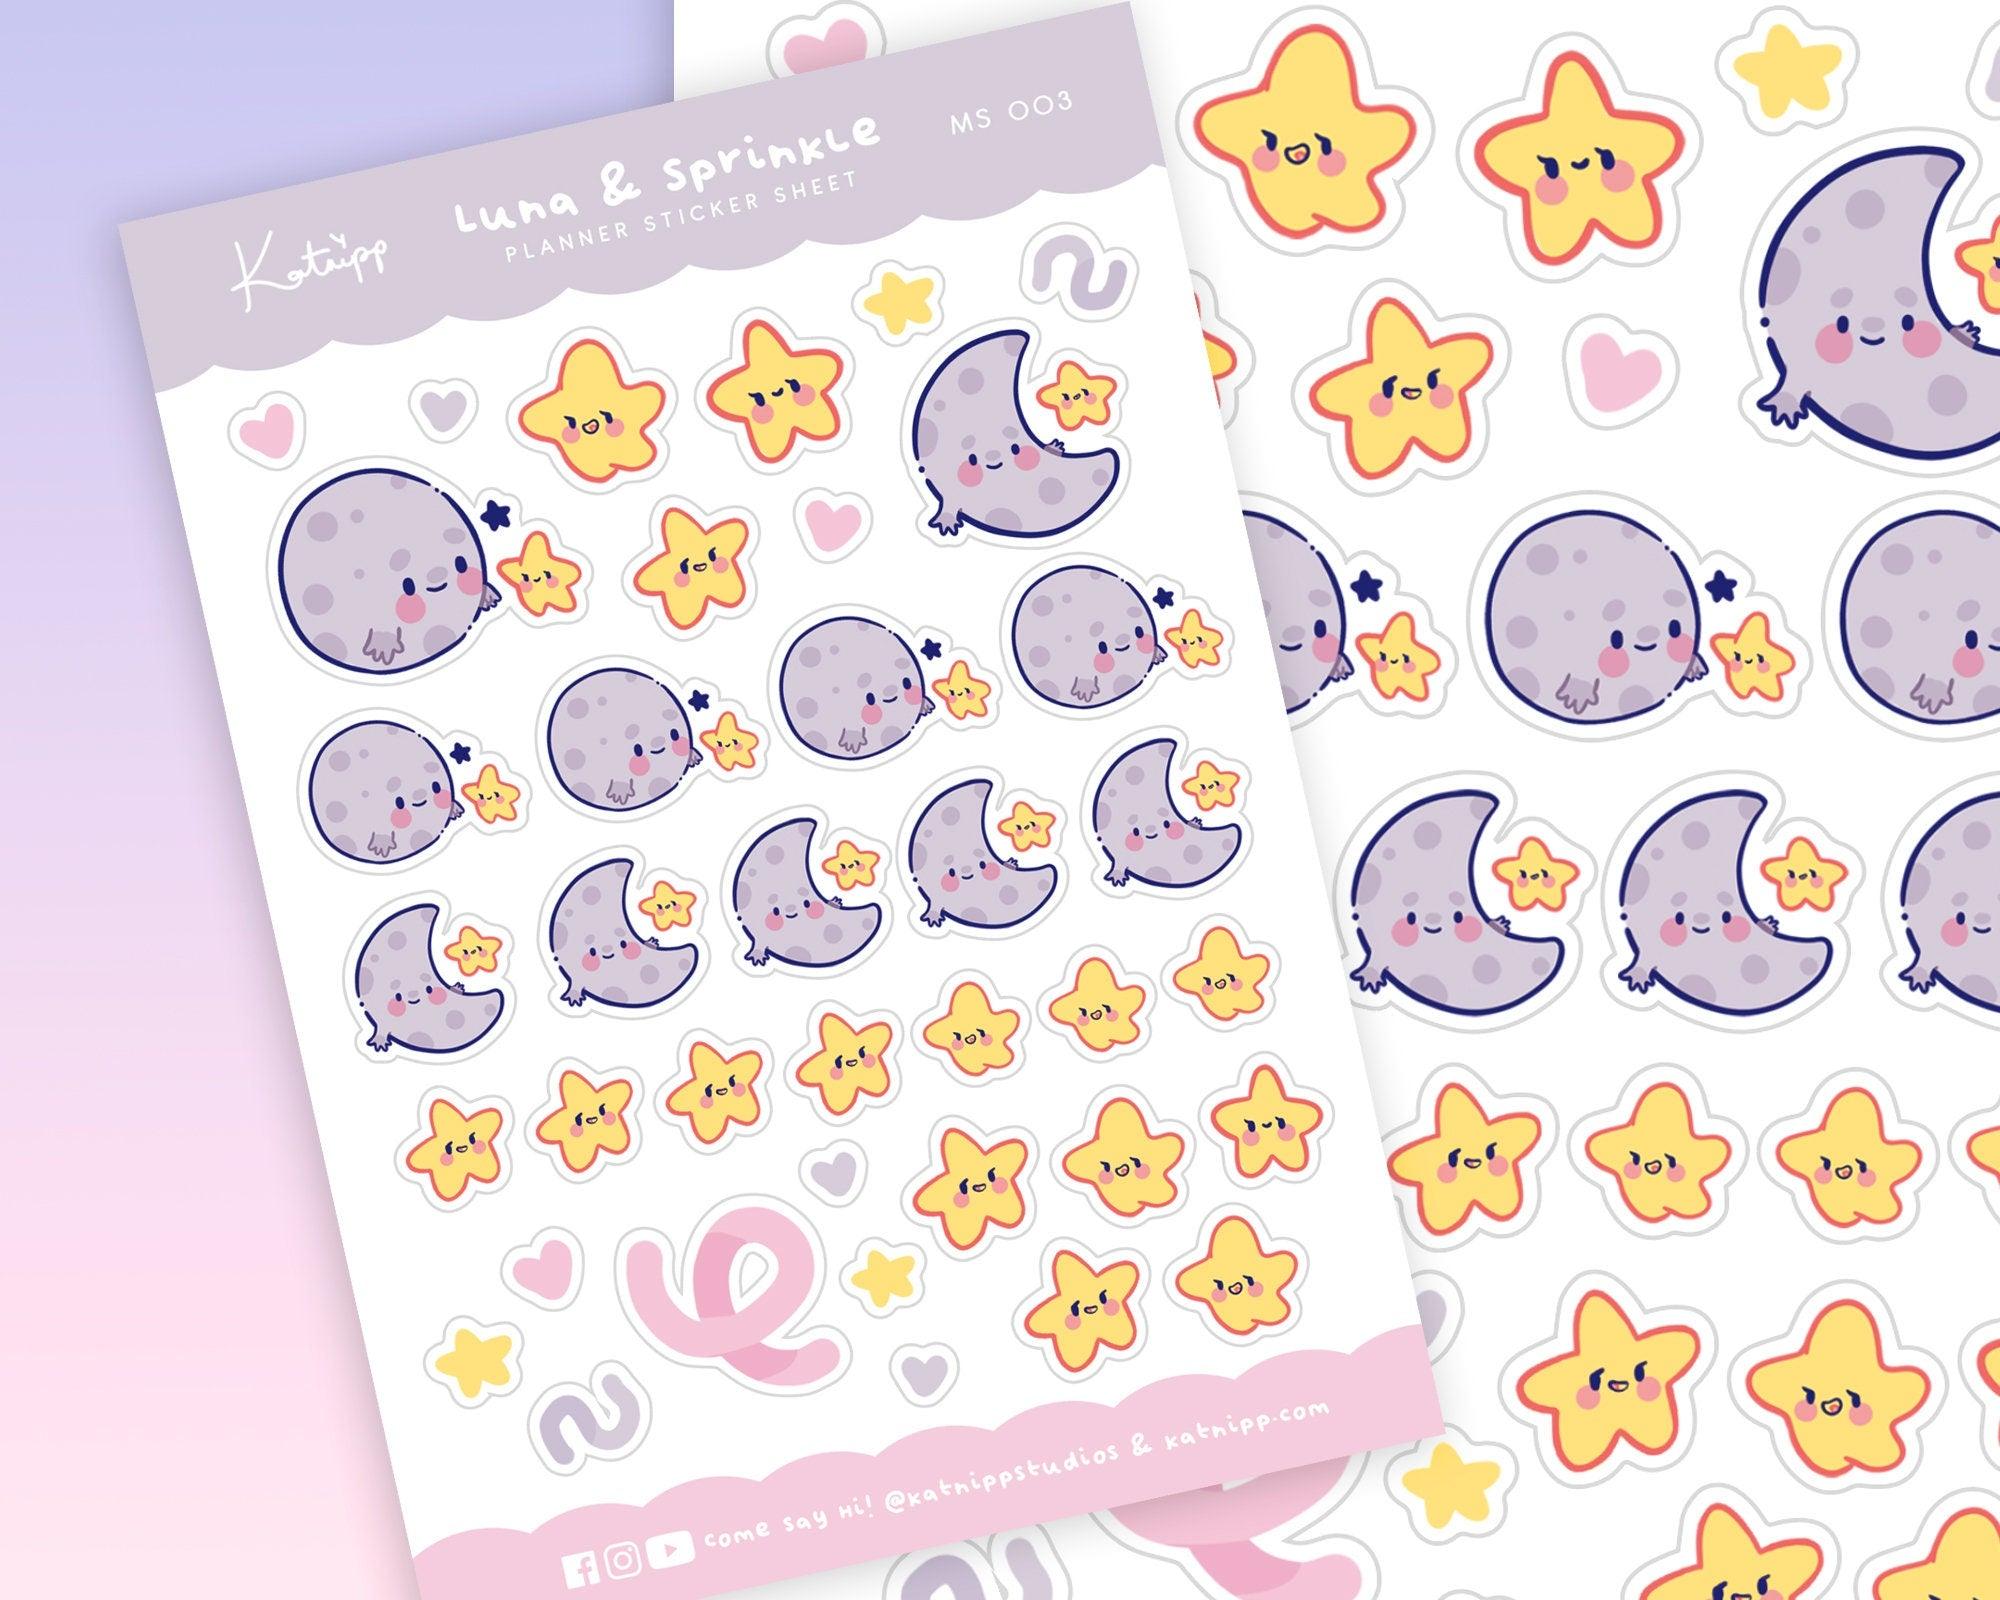 5 Best Moon Stickers Reviewed: The Ultimate List - Stationery Weekly